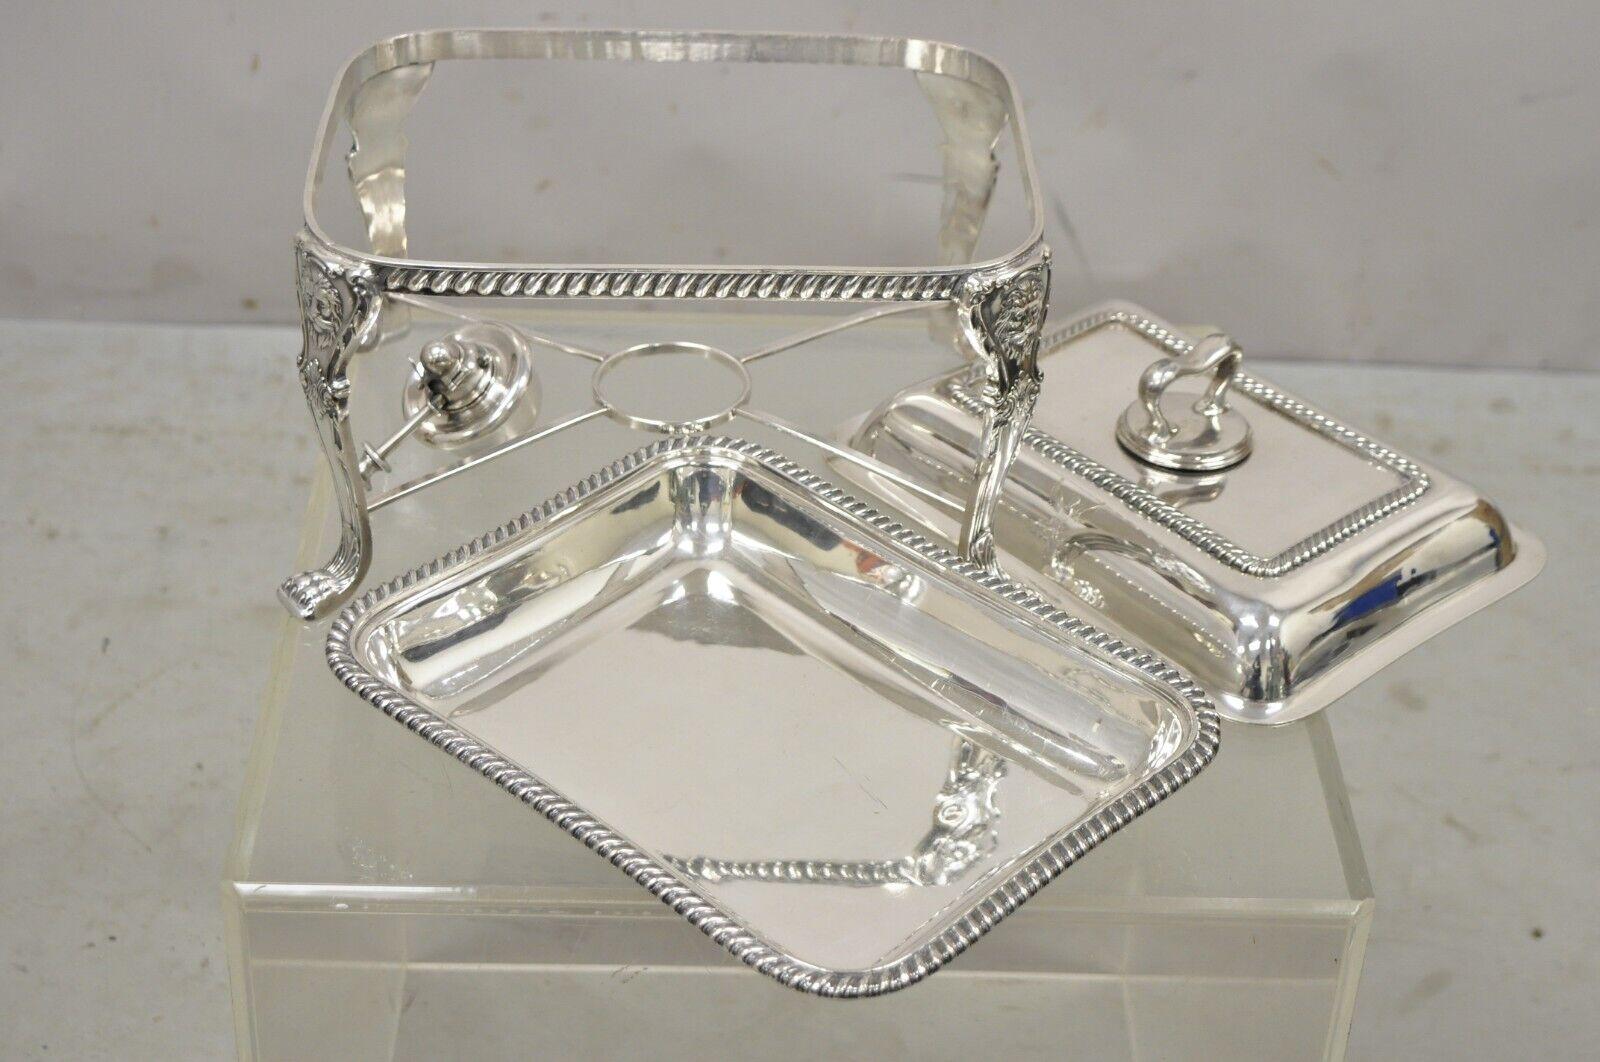 Antique Walker & Hall Silver Plated Chafing Serving Dish Warmer with Lions 1